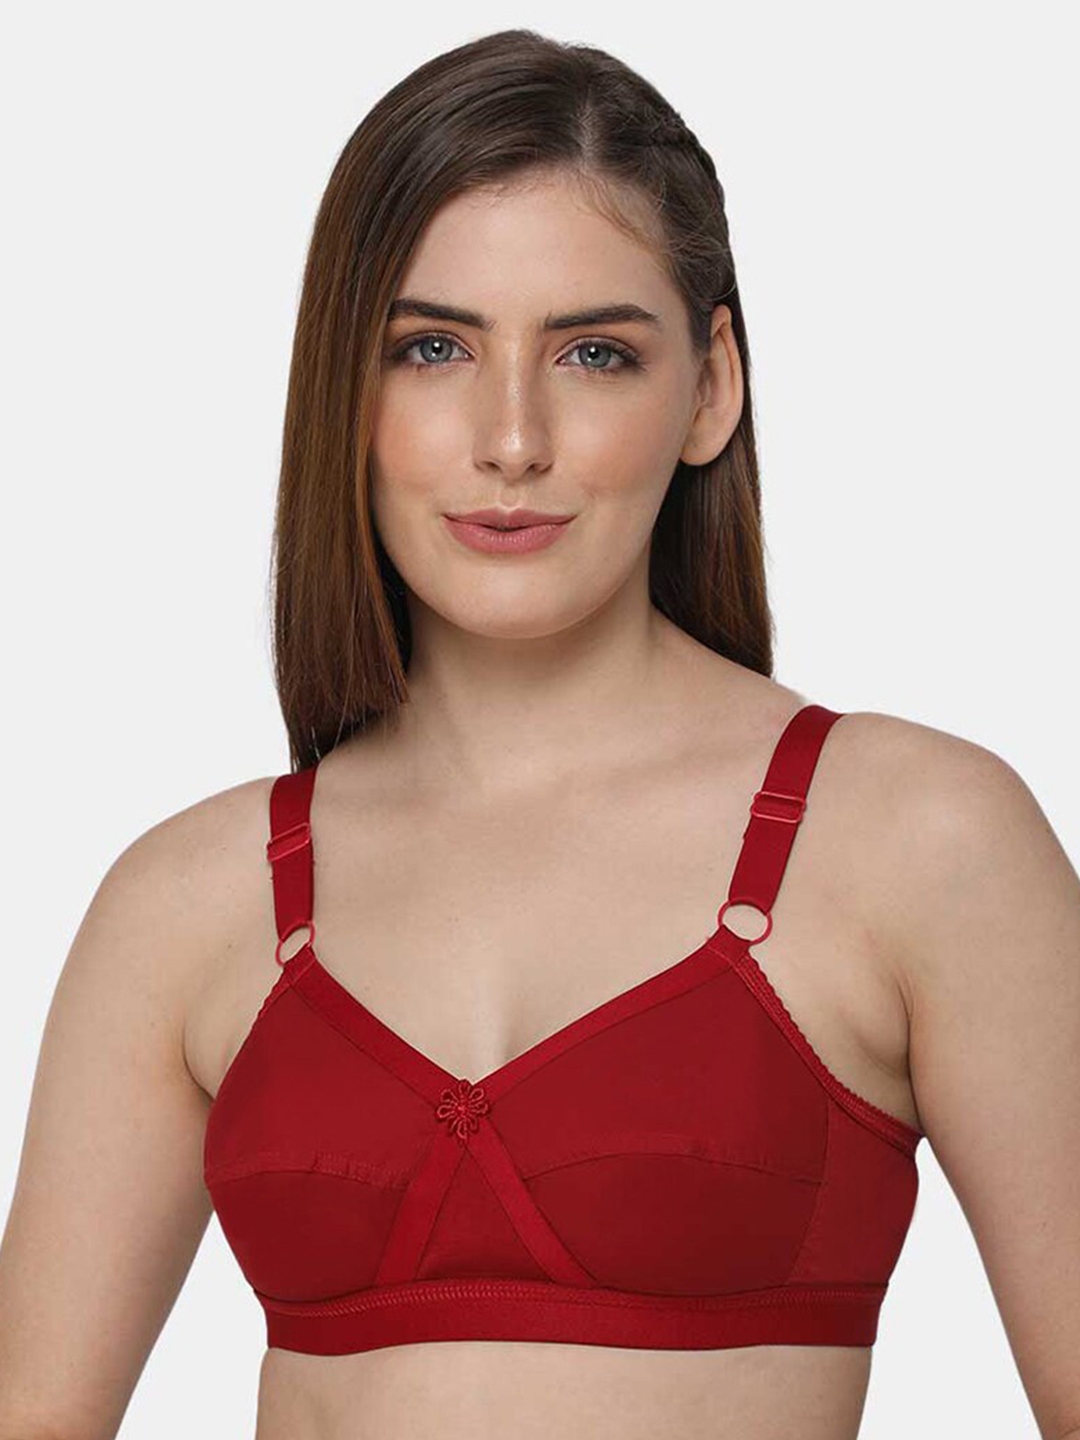 Buy Intimacy Lingerie Full Coverage Cotton Bra With All Day Comfort Bra For Women 26591170 4030